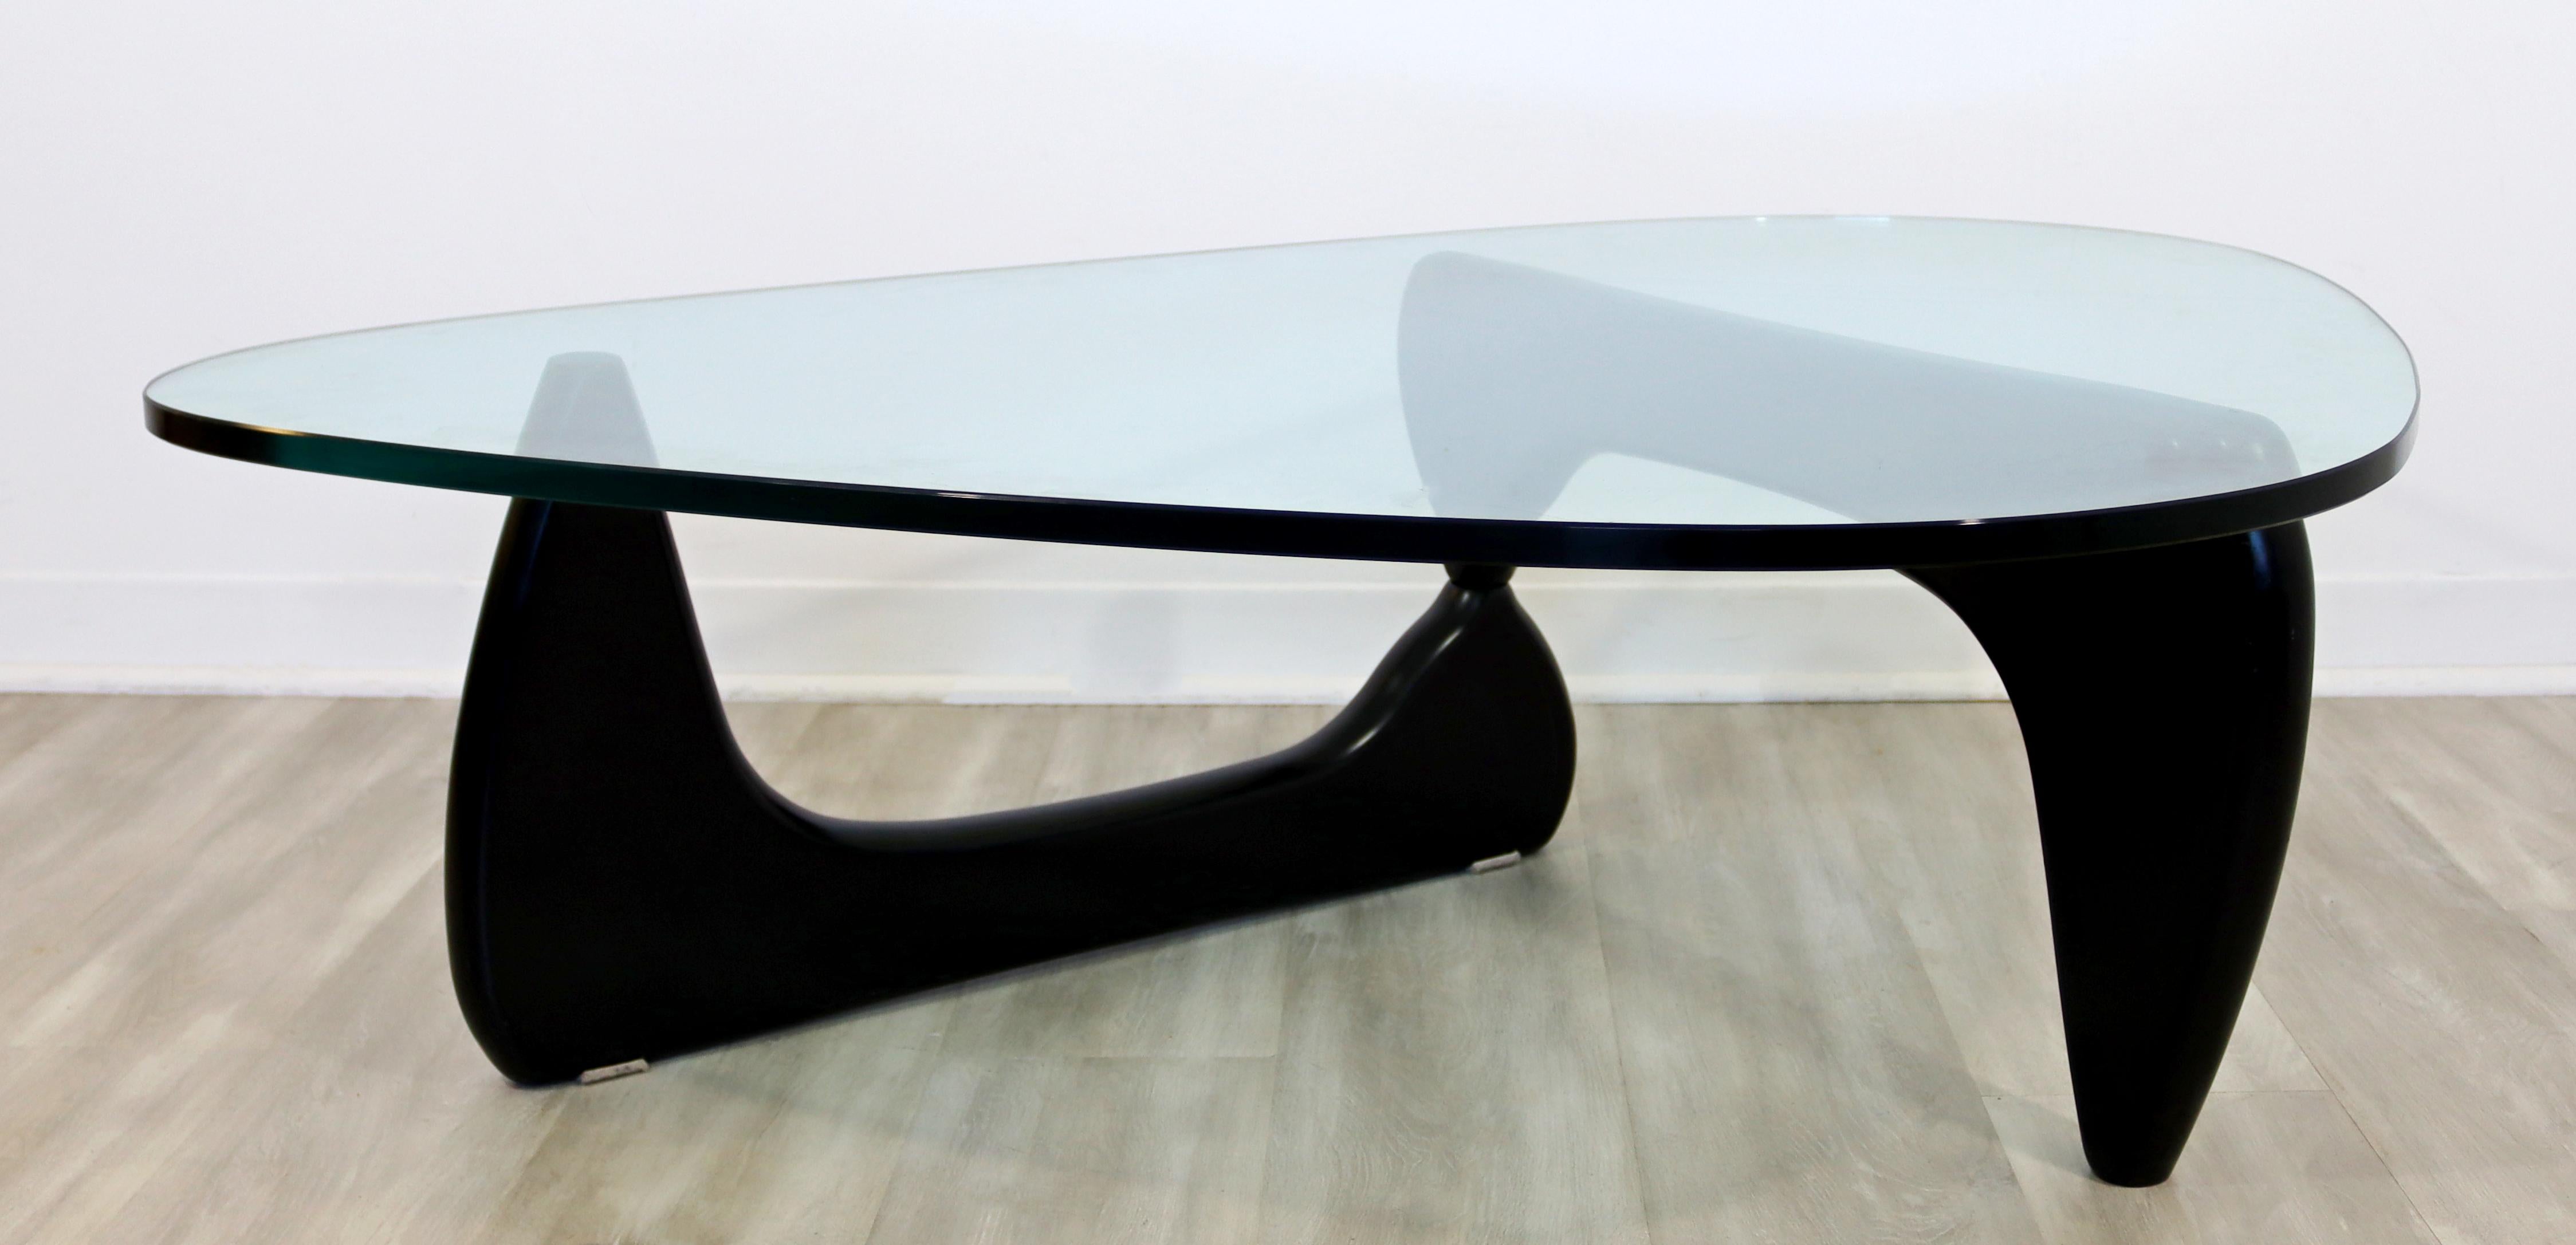 For your consideration is an original, vintage, adjustable Noguchi coffee table, with a glass top, circa the 1960s. Black Ebony wood.
Measures: 15.5 x 50 x 36 in.